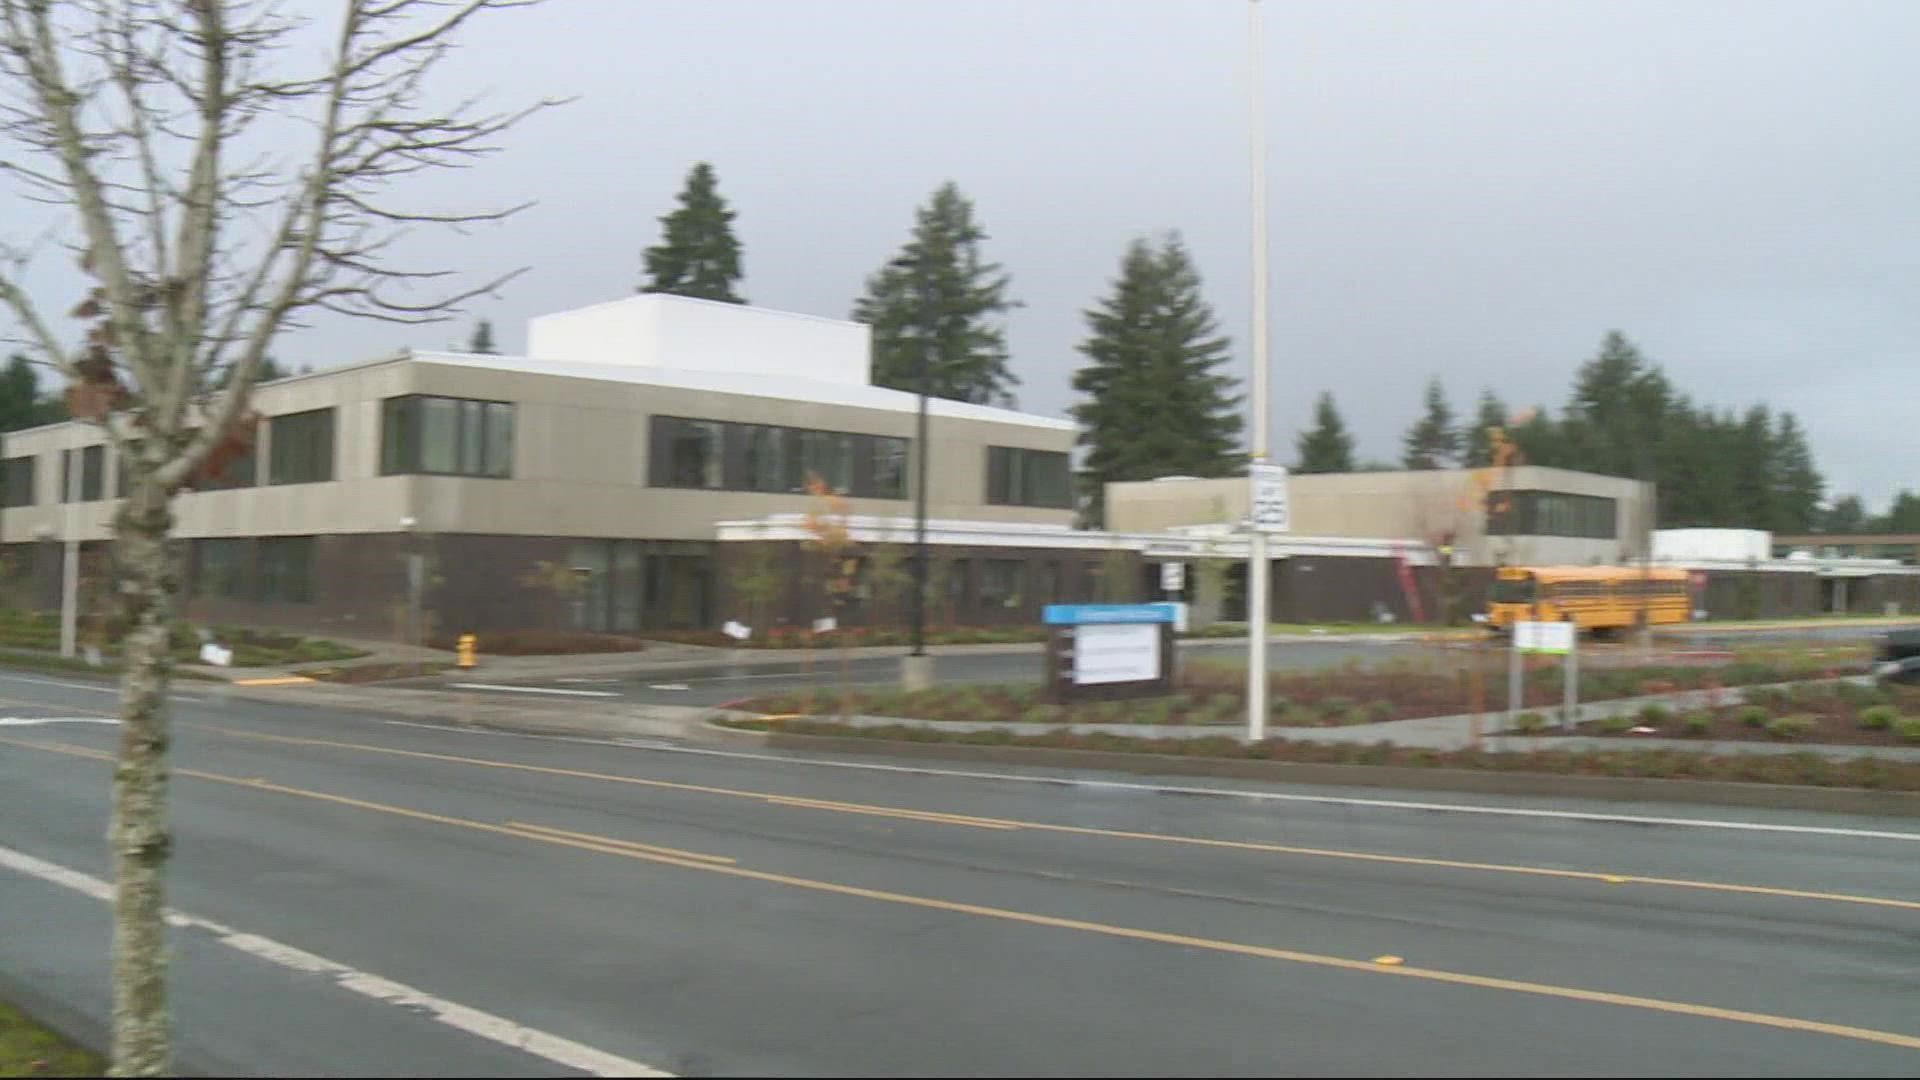 The 16-year-old student who was stabbed was treated and released from the hospital, Vancouver police said.